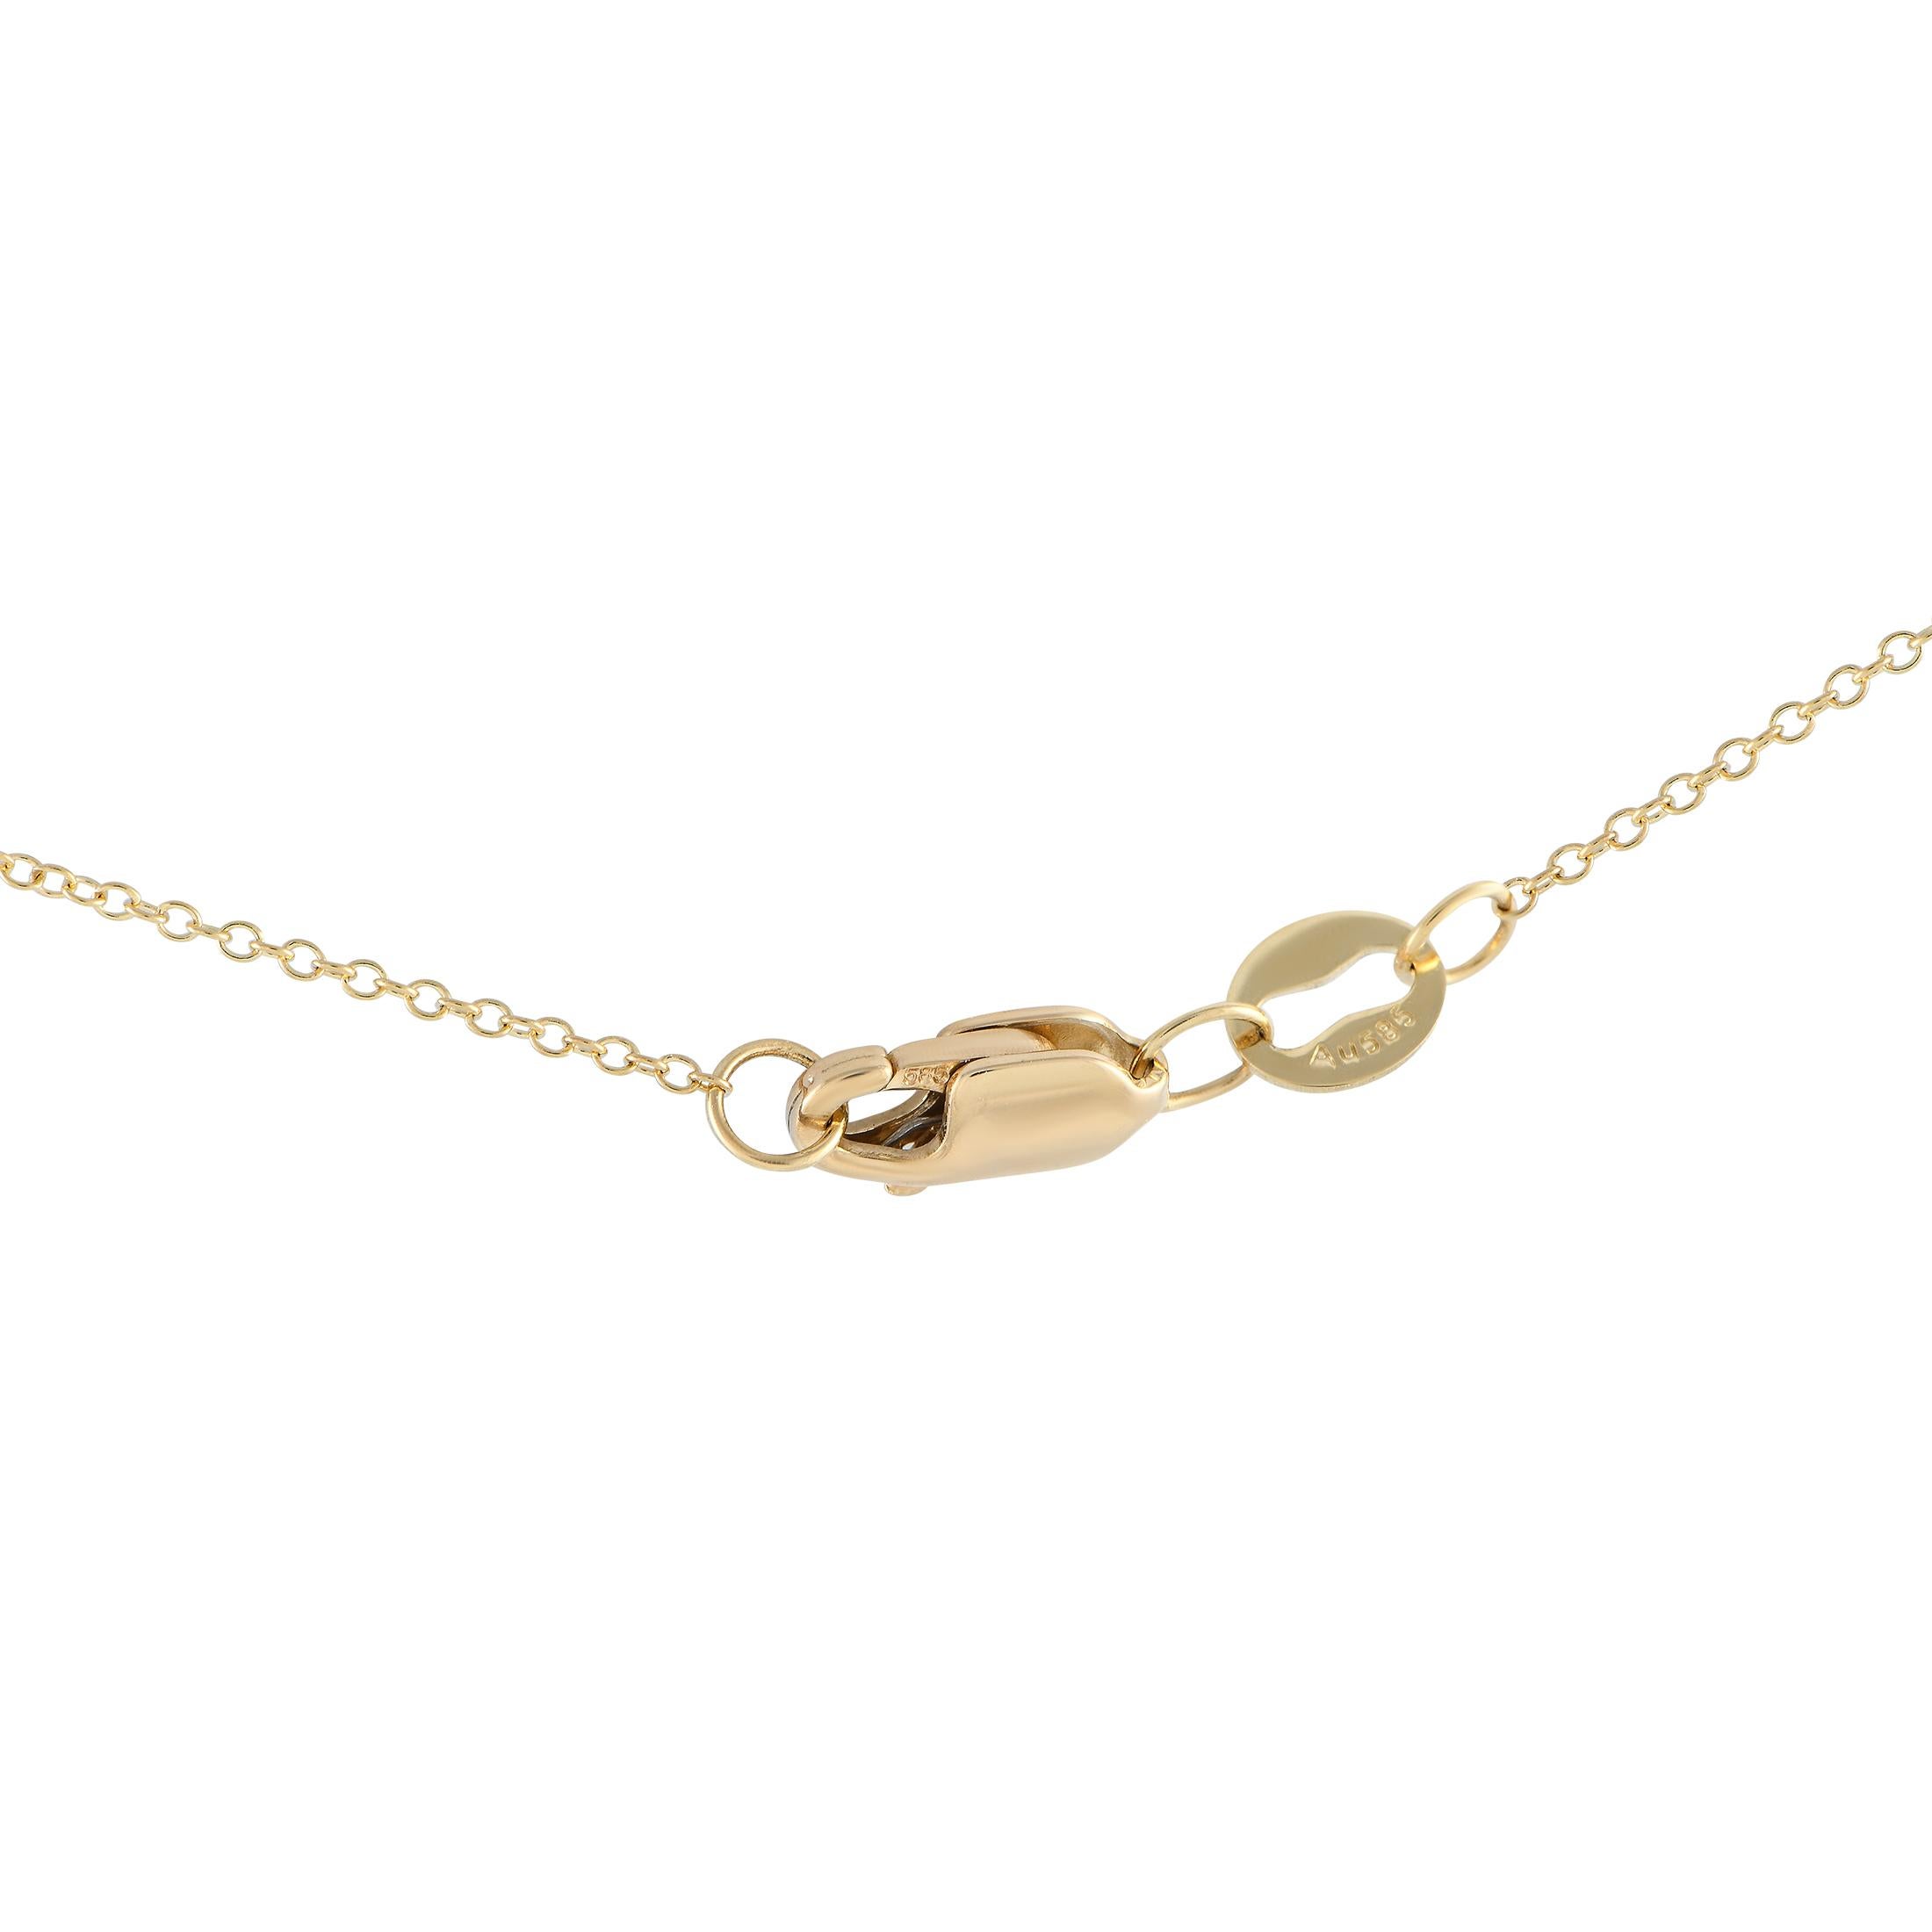 If relaxed luxury is your style, then this necklace is for you. Meant for casual or everyday wear, this necklace exudes effortless elegance with its minimalist beauty. The slim necklace chain measures 16 inches long and holds a flower-shaped pendant